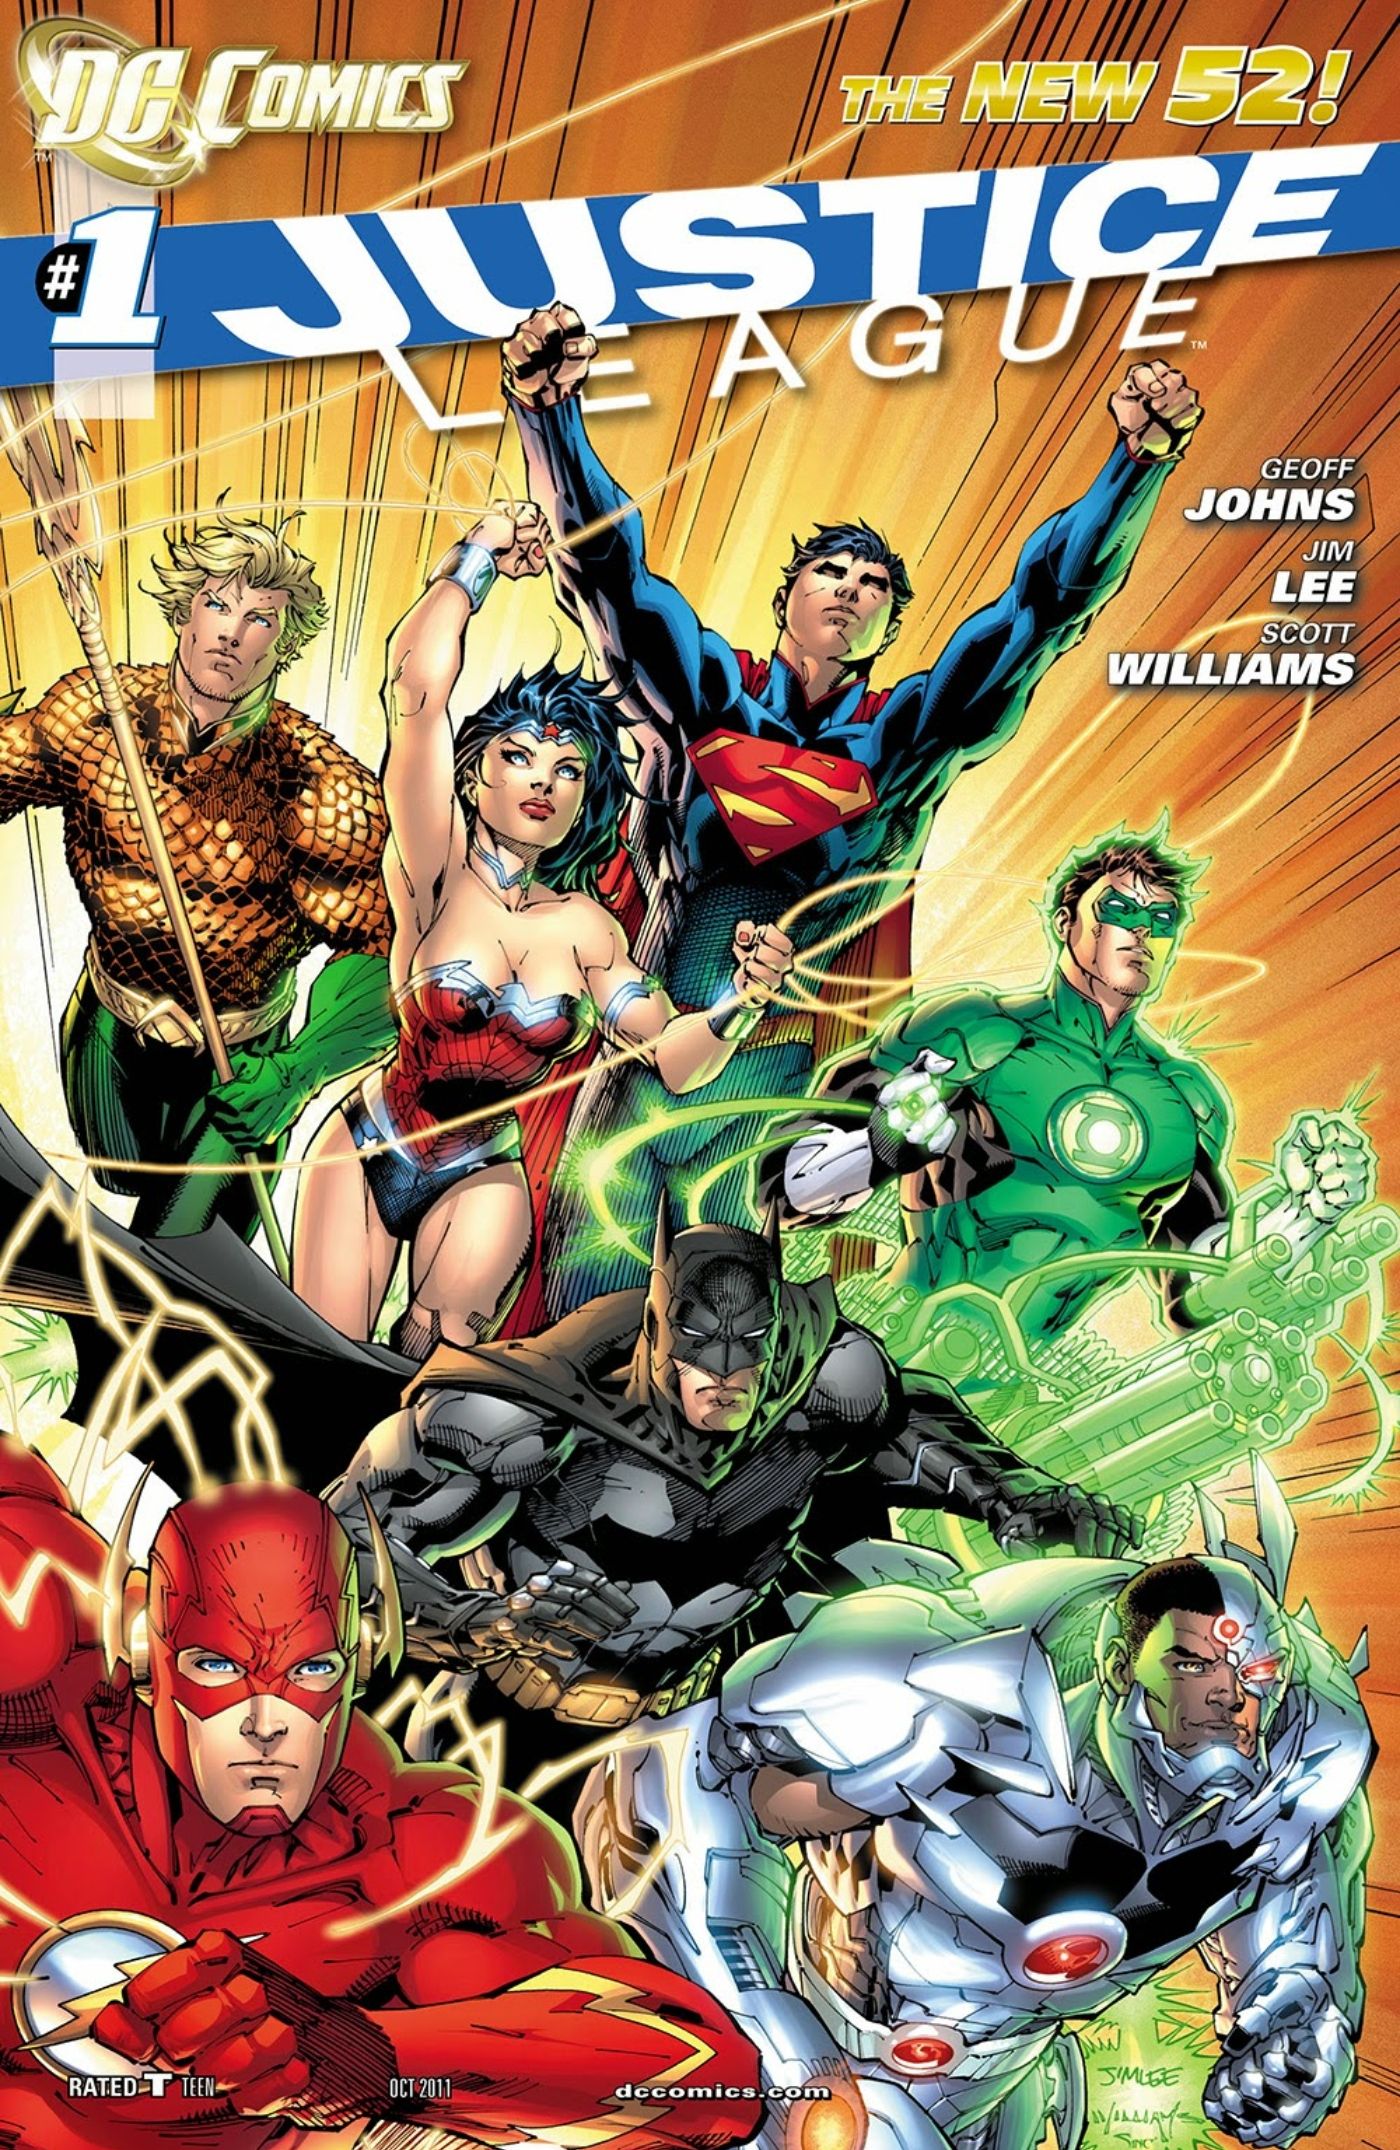 The cover for New 52's Justice League #1.